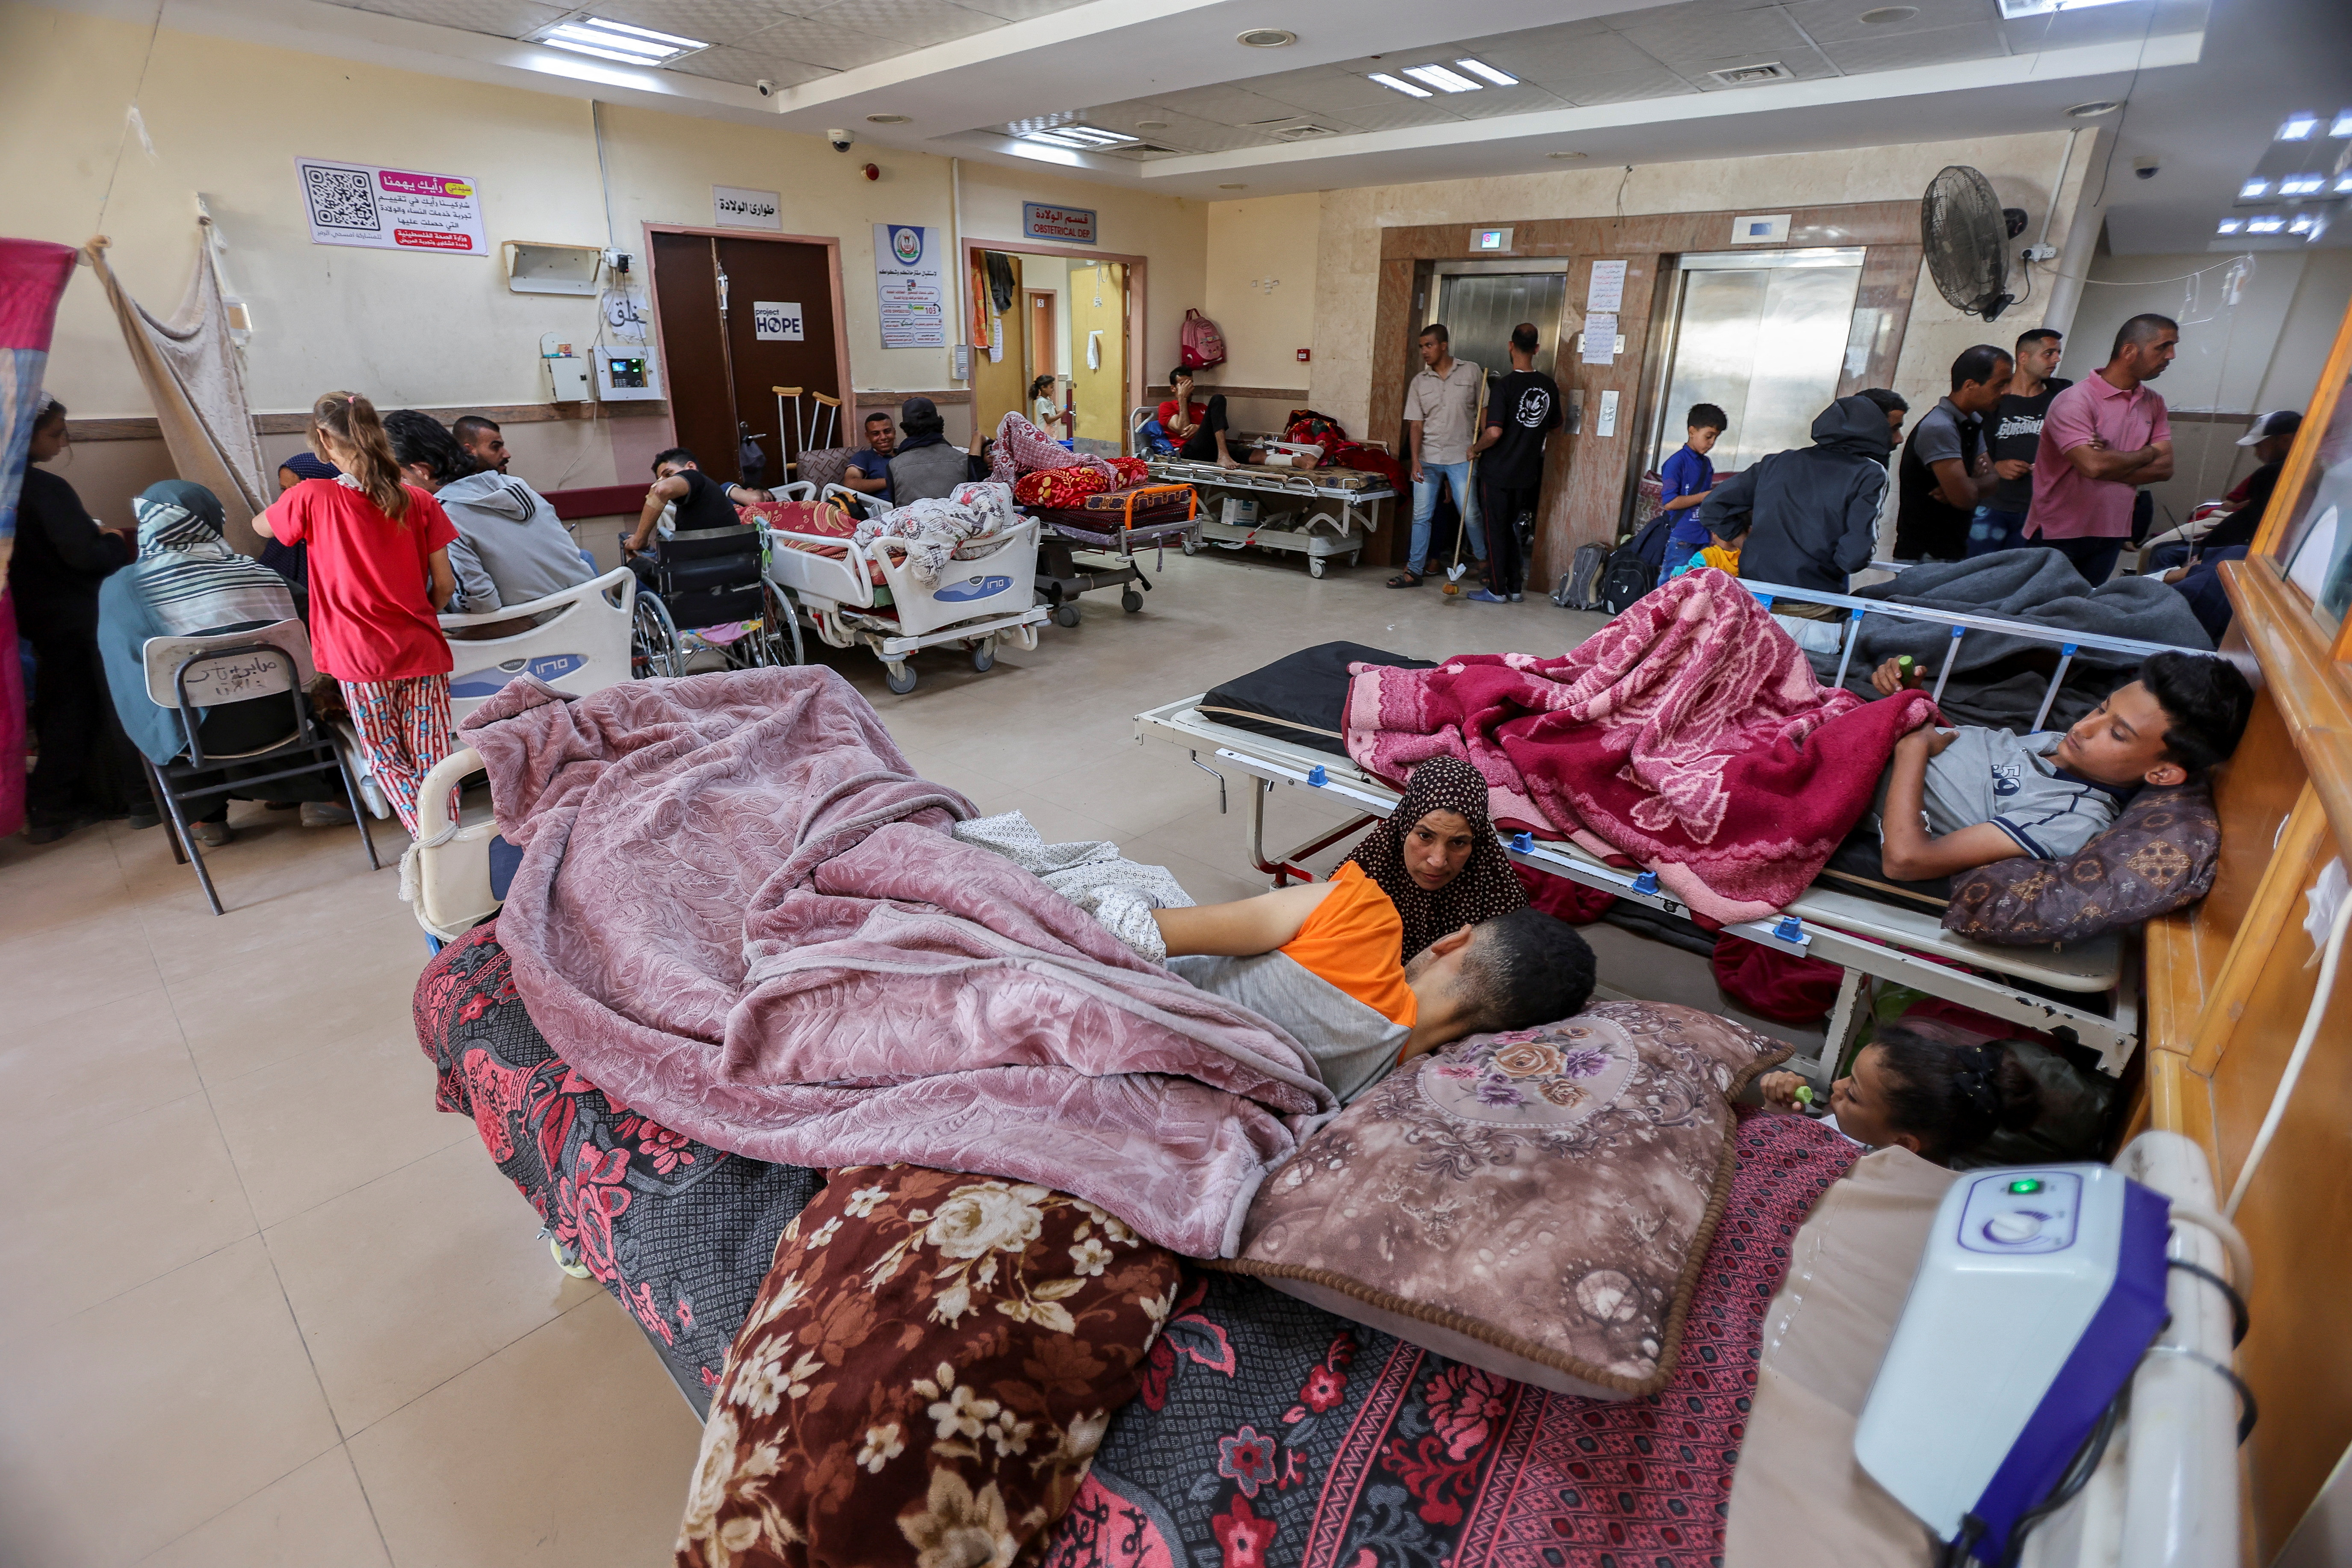 Palestinians wounded in Israeli fire lie on beds as they receive treatment at Al-Aqsa hospital in Deir Al-Balah in the central Gaza Strip